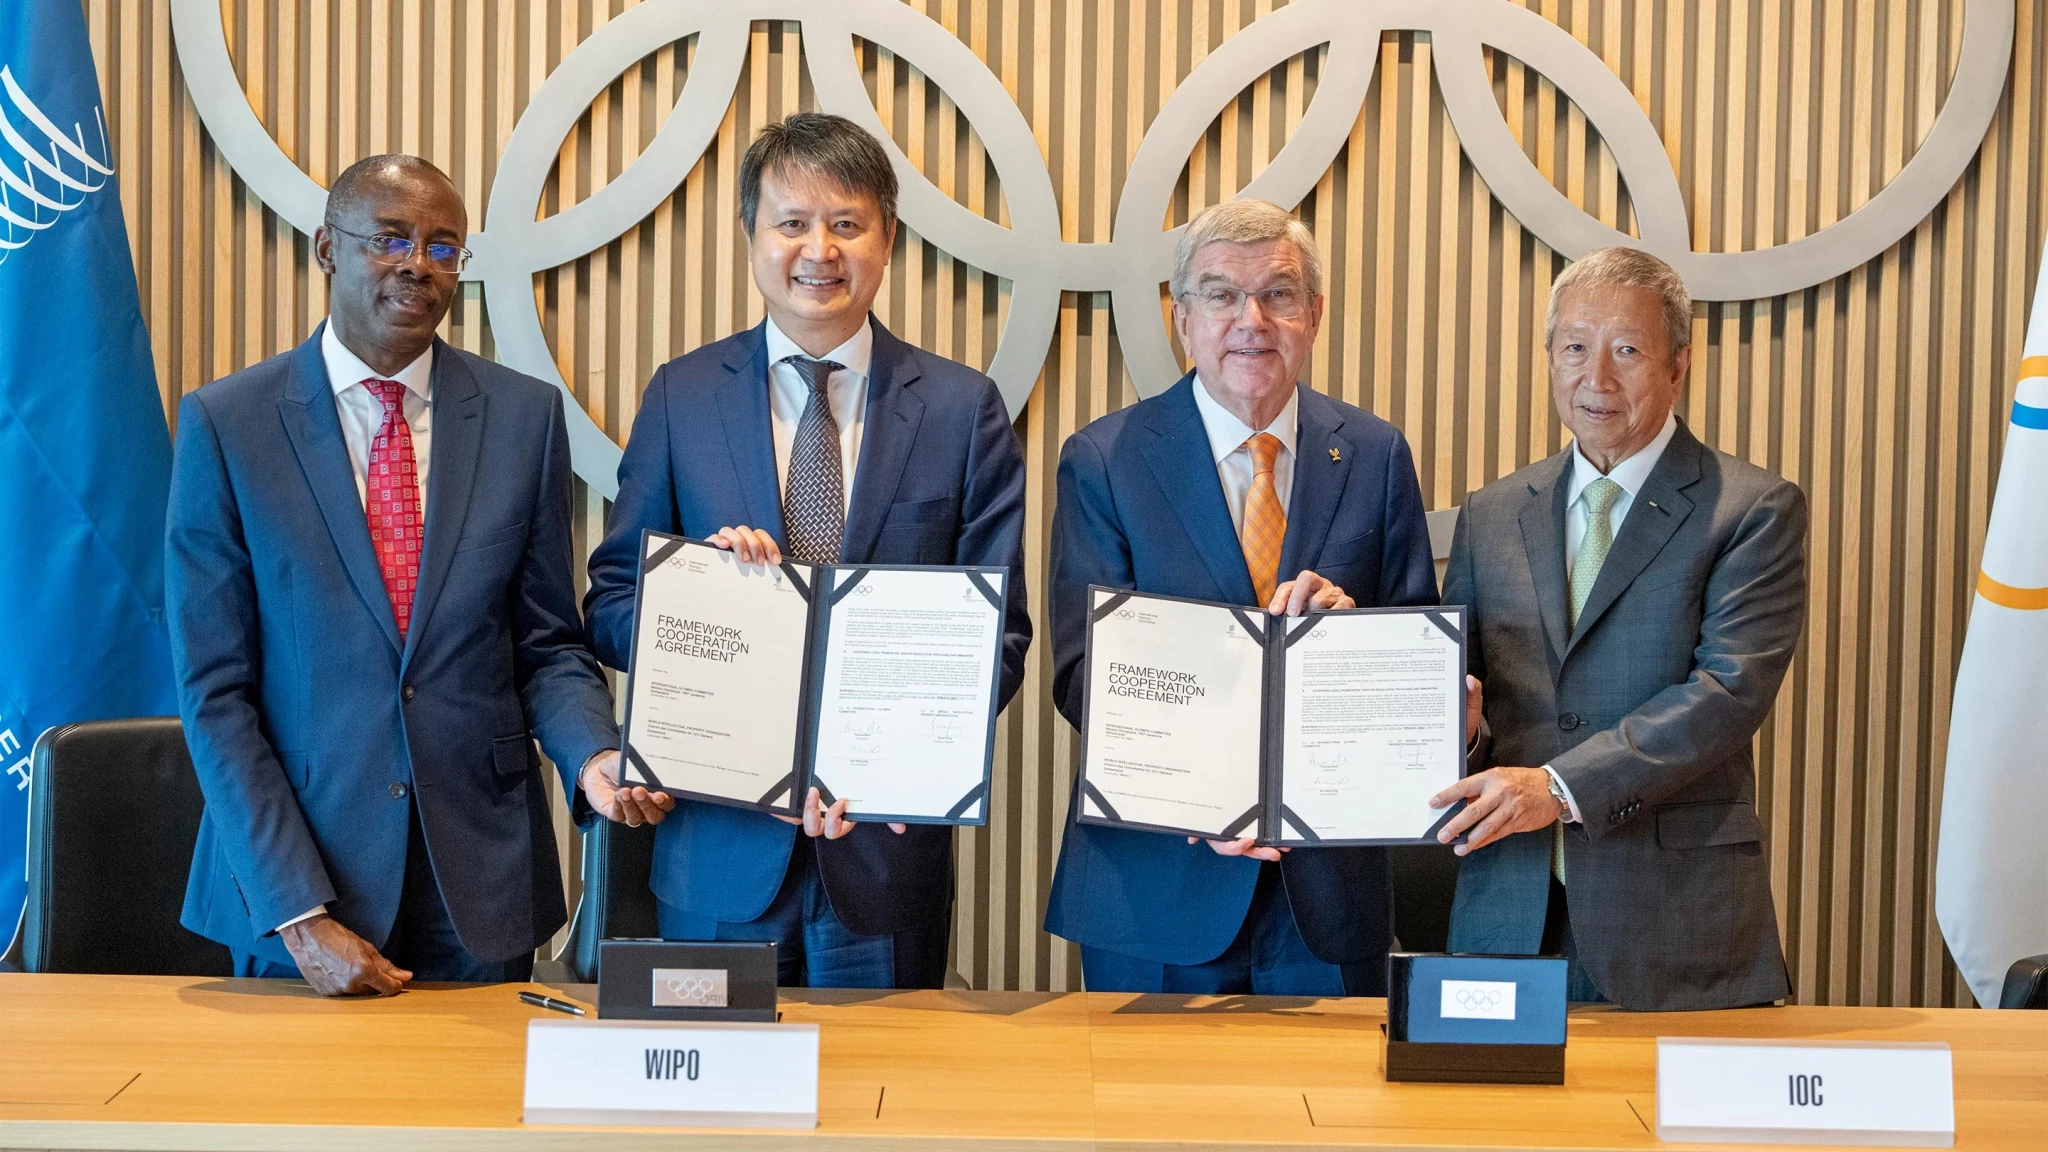 The IOC has entered a partnership with WIPO ©IOC